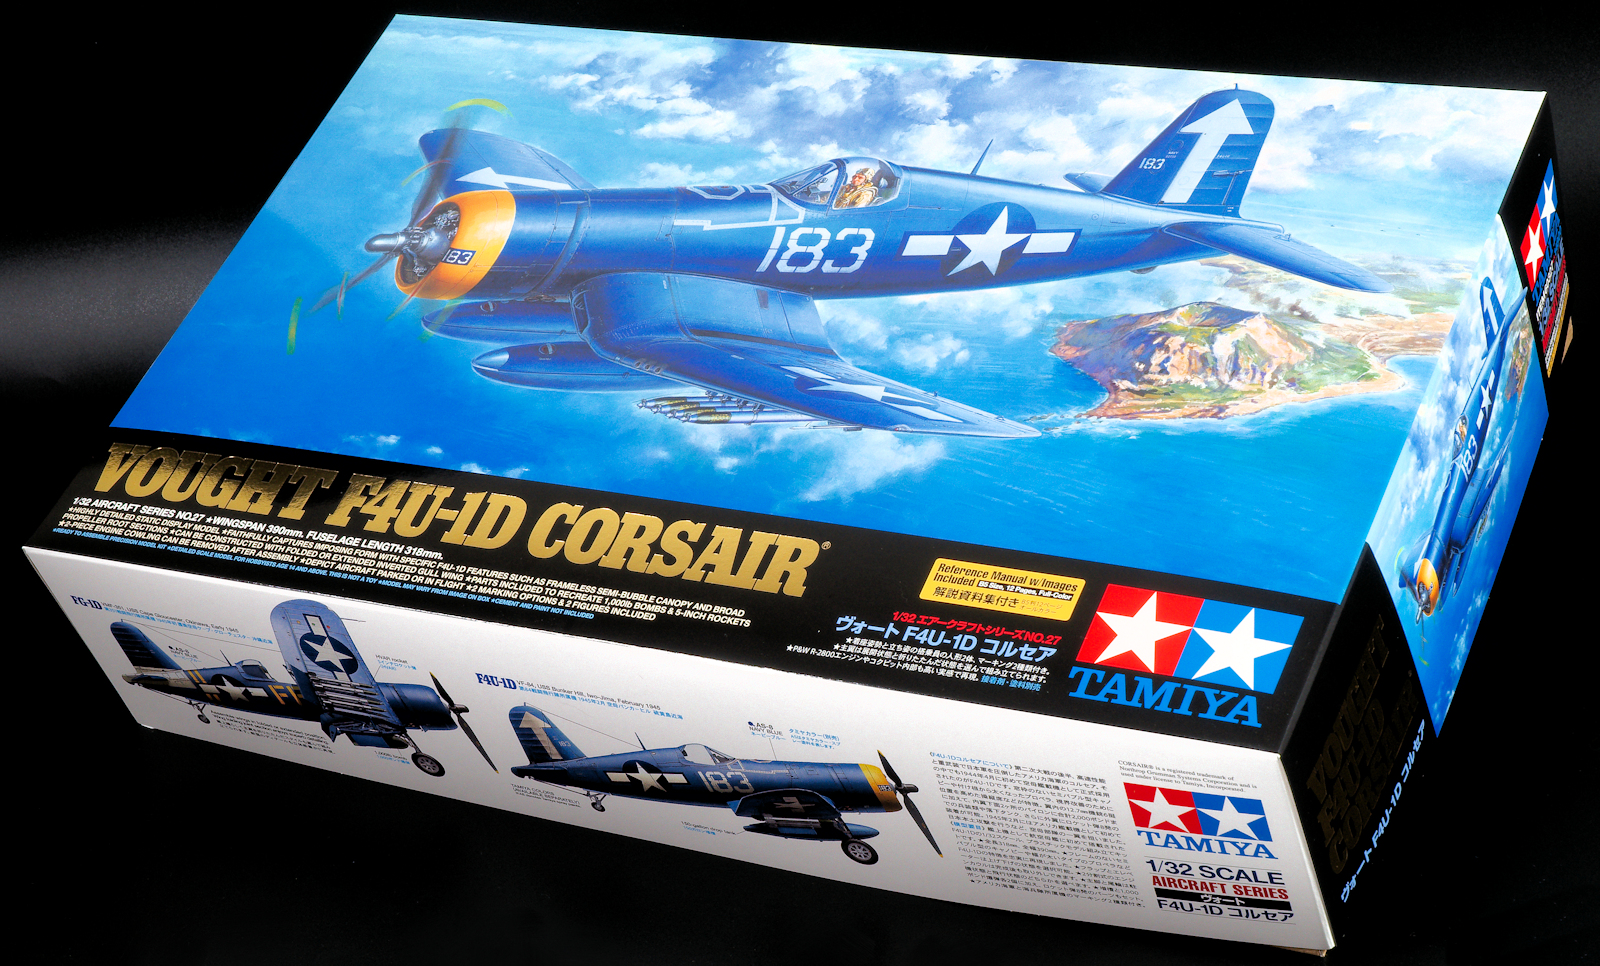 The Modelling News: In-boxed: 1/32nd scale F4U-1D Corsair from 